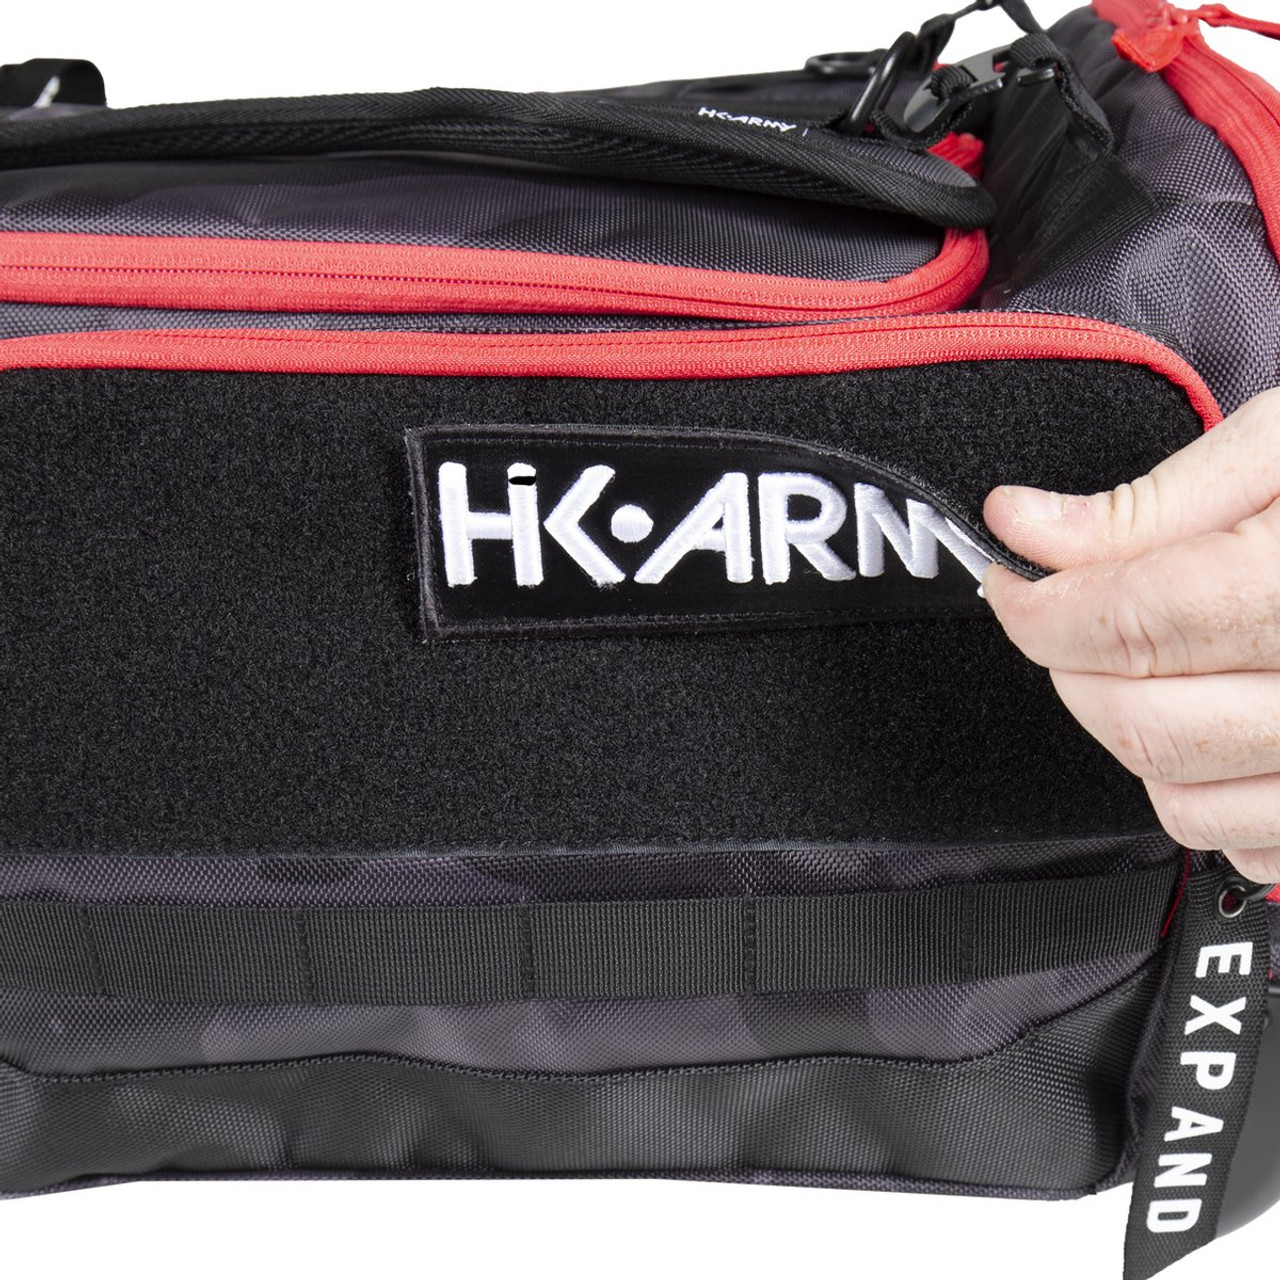 HK - Expand Roller Gearbag - Shroud Black/Red